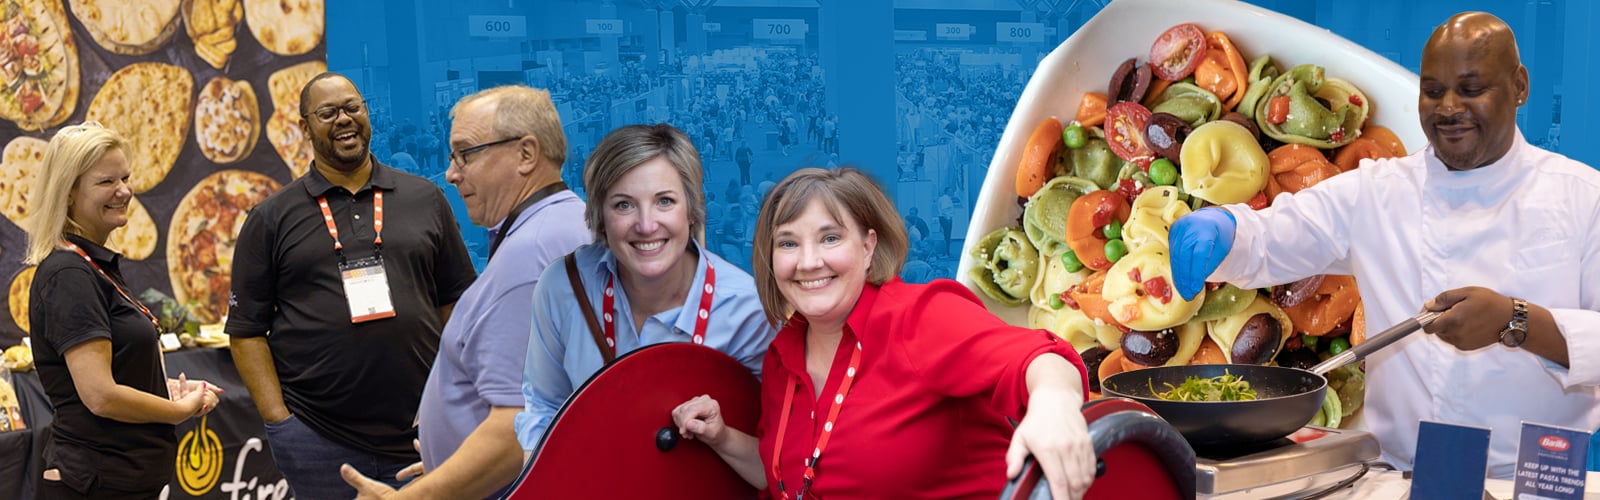 Collage showing trade show floor, people in name tags smiling and talking, and a chef preparing food in a pan.